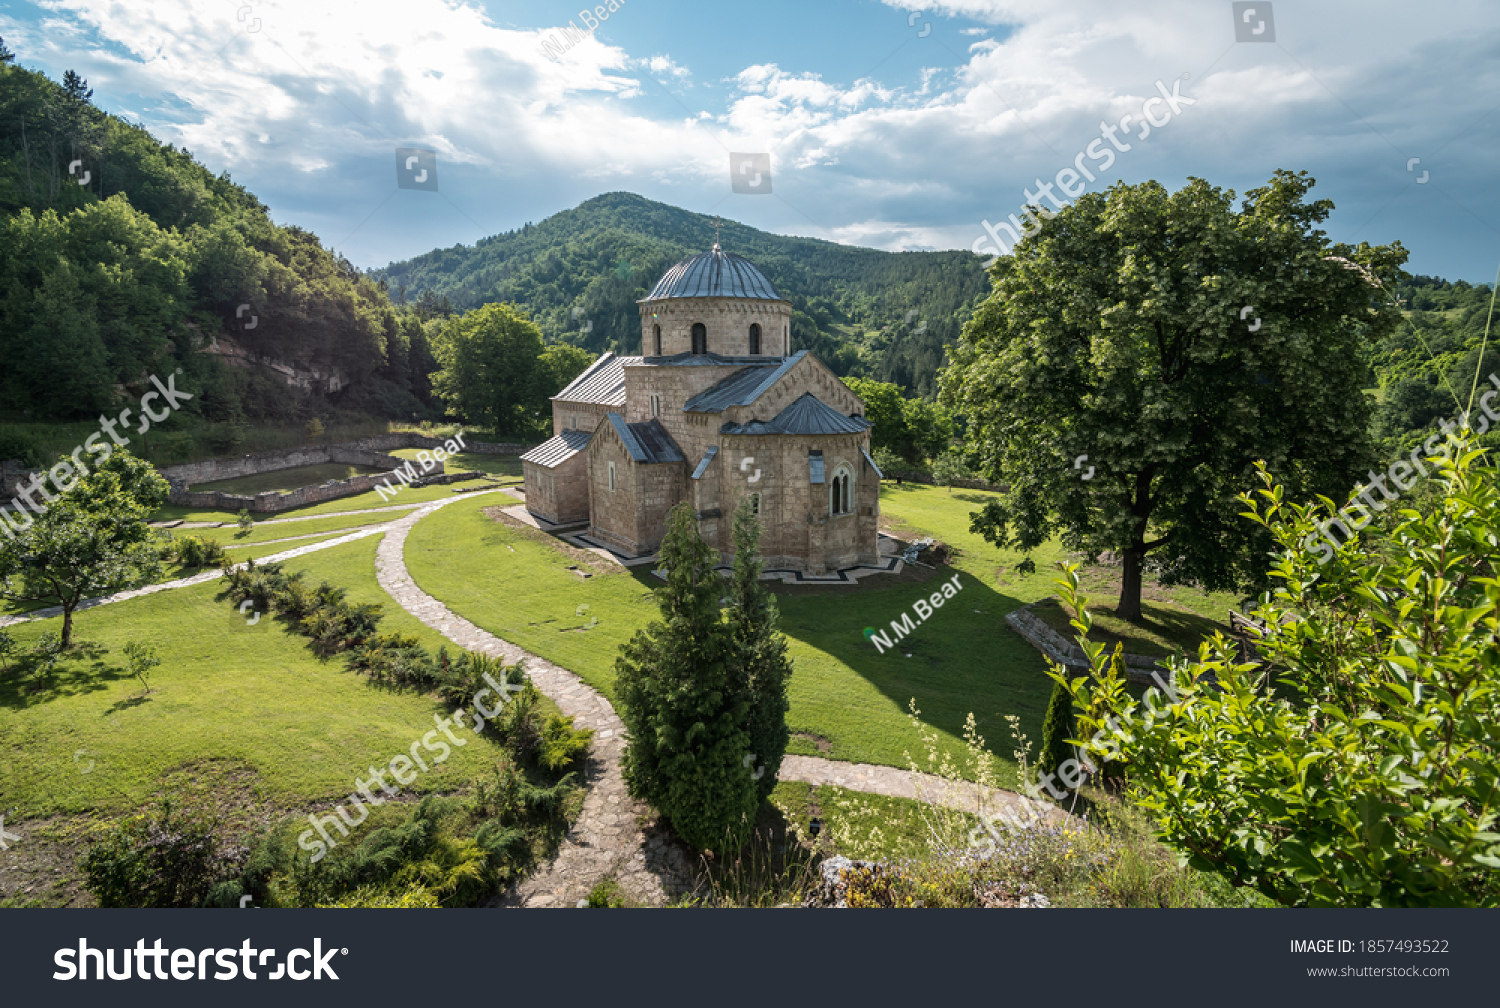 Serbian Orthodox Monastery Gradac, an Endowment of Queen Helen of Anjou from 13th century, Republic of Serbia #1857493522